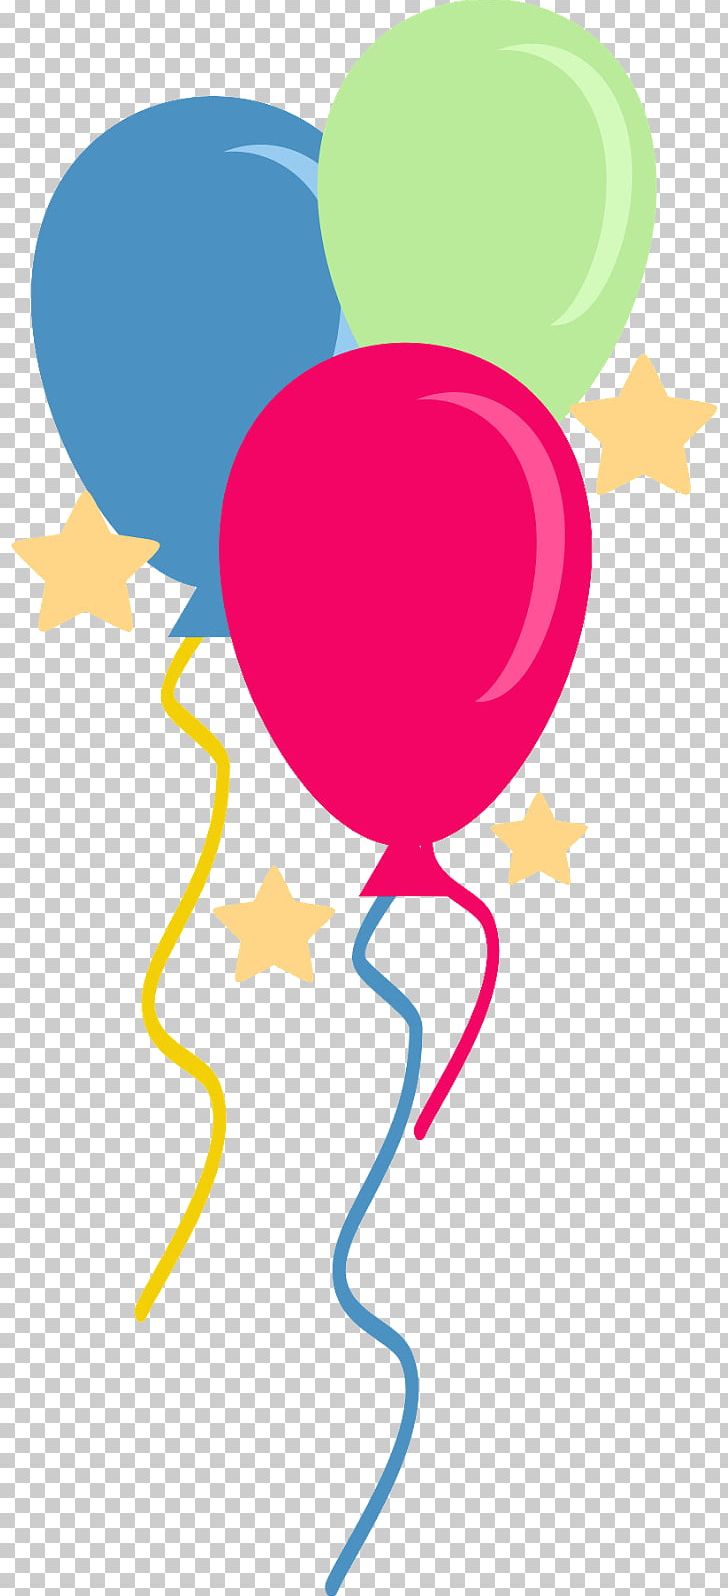 Balloon Graphic Design Pink M PNG, Clipart, Artwork, Balloon, Childrens Party, Clip Art, Flower Free PNG Download